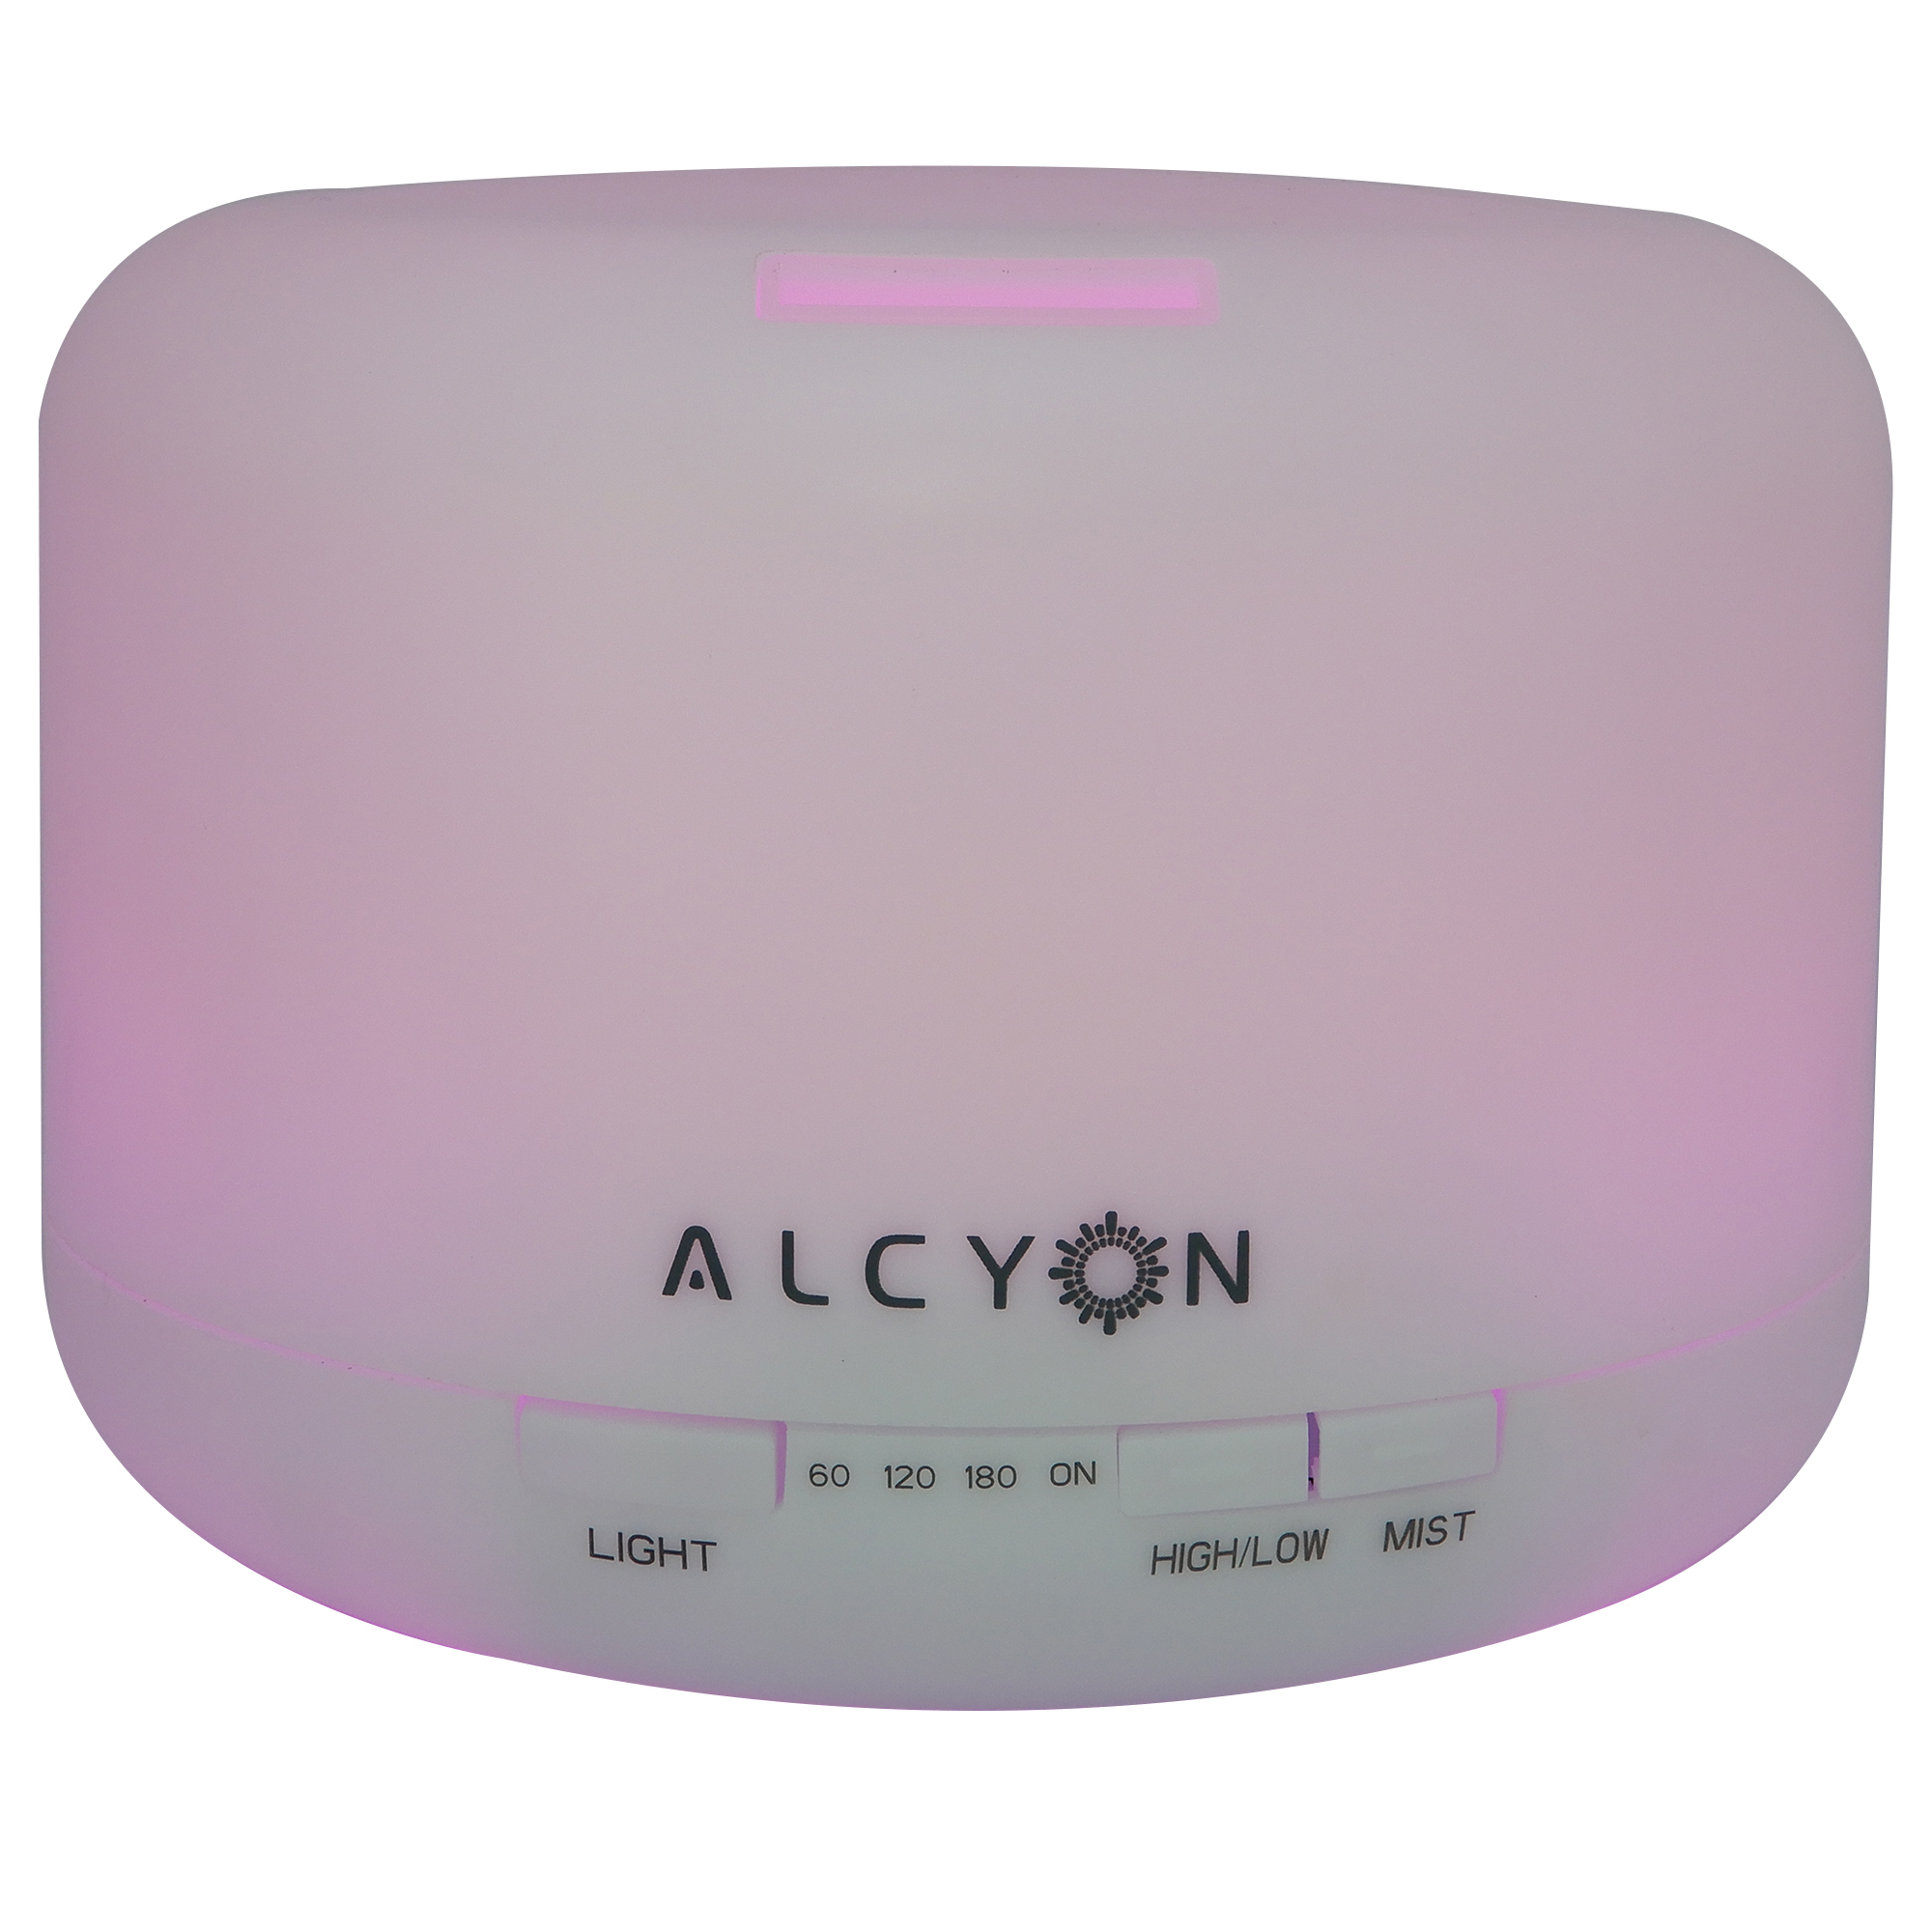 NEW Taiko Aroma Diffuser Alcyon,Candles & Diffusers eBay